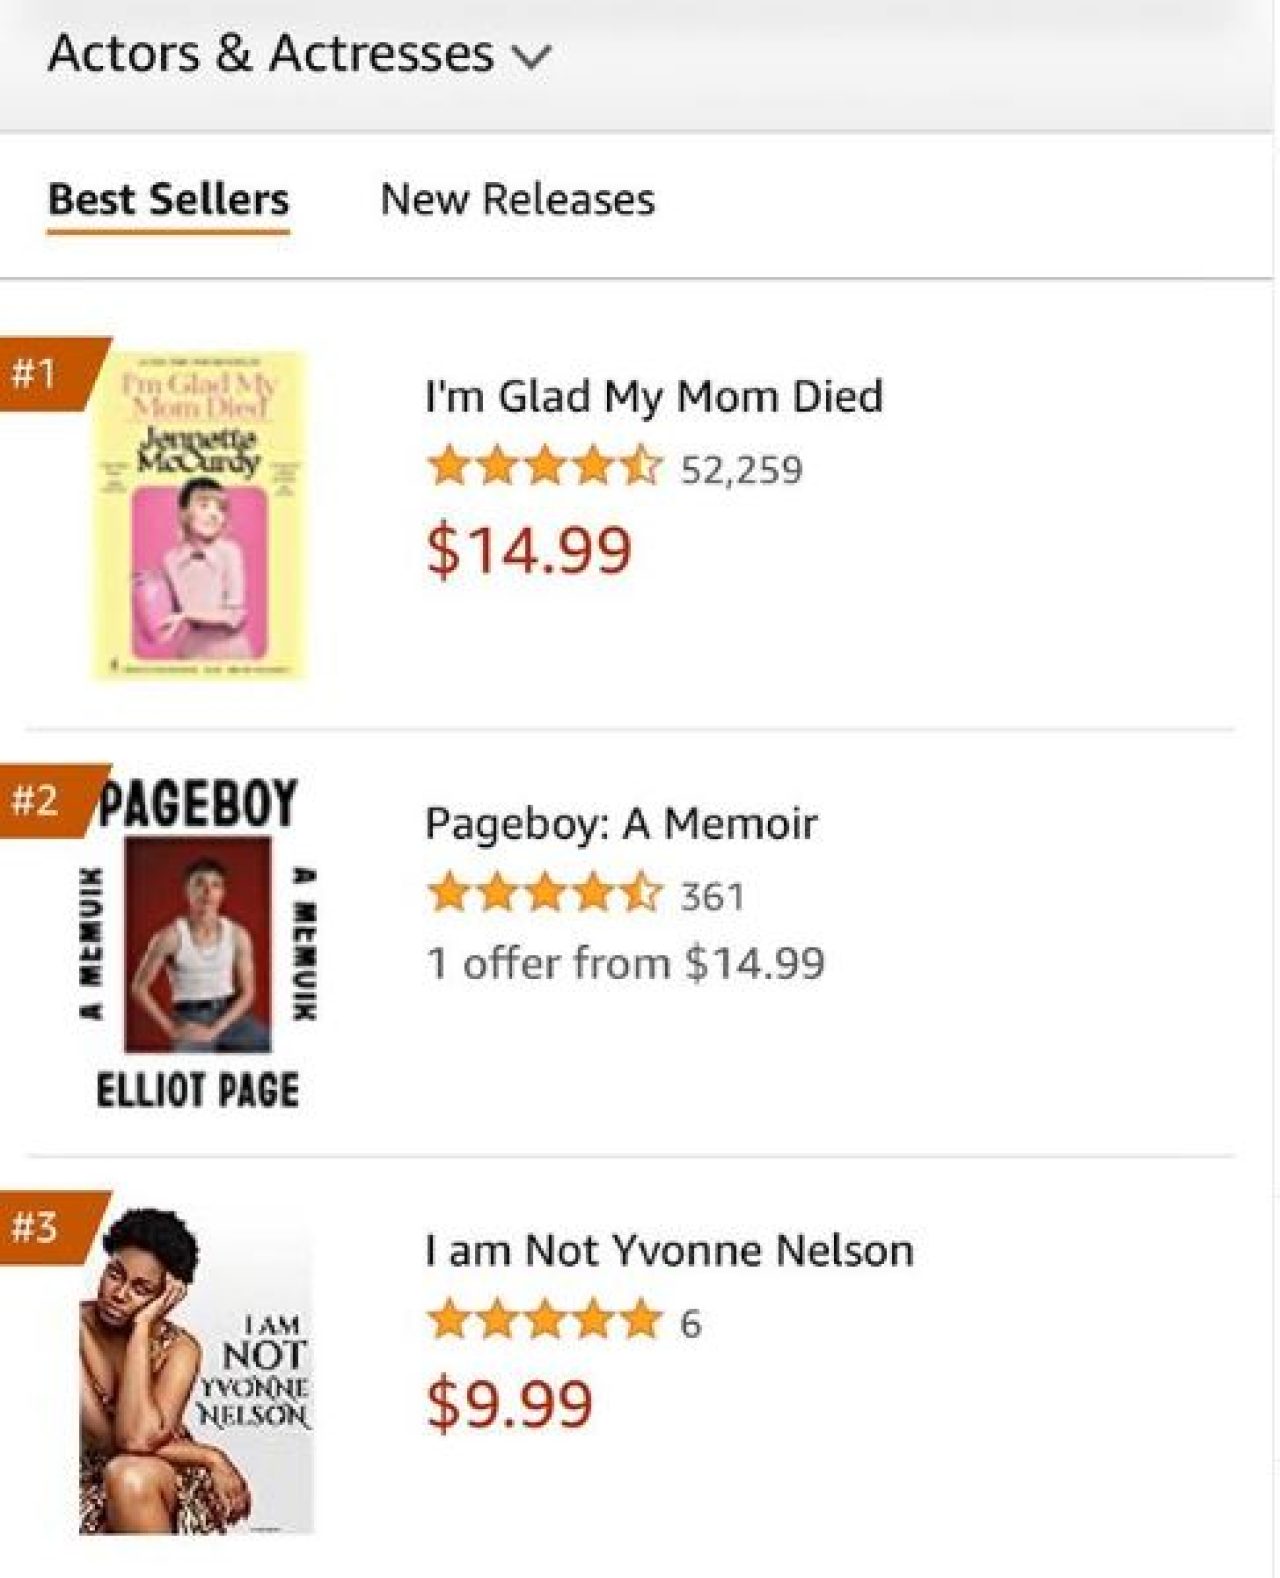 "I AM NOT YVONNE NELSON" Soars to #3 Bestseller on Amazon. AdvertAfrica News on afronewswire.com: Amplifying Africa's Voice | afronewswire.com | Breaking News & Stories